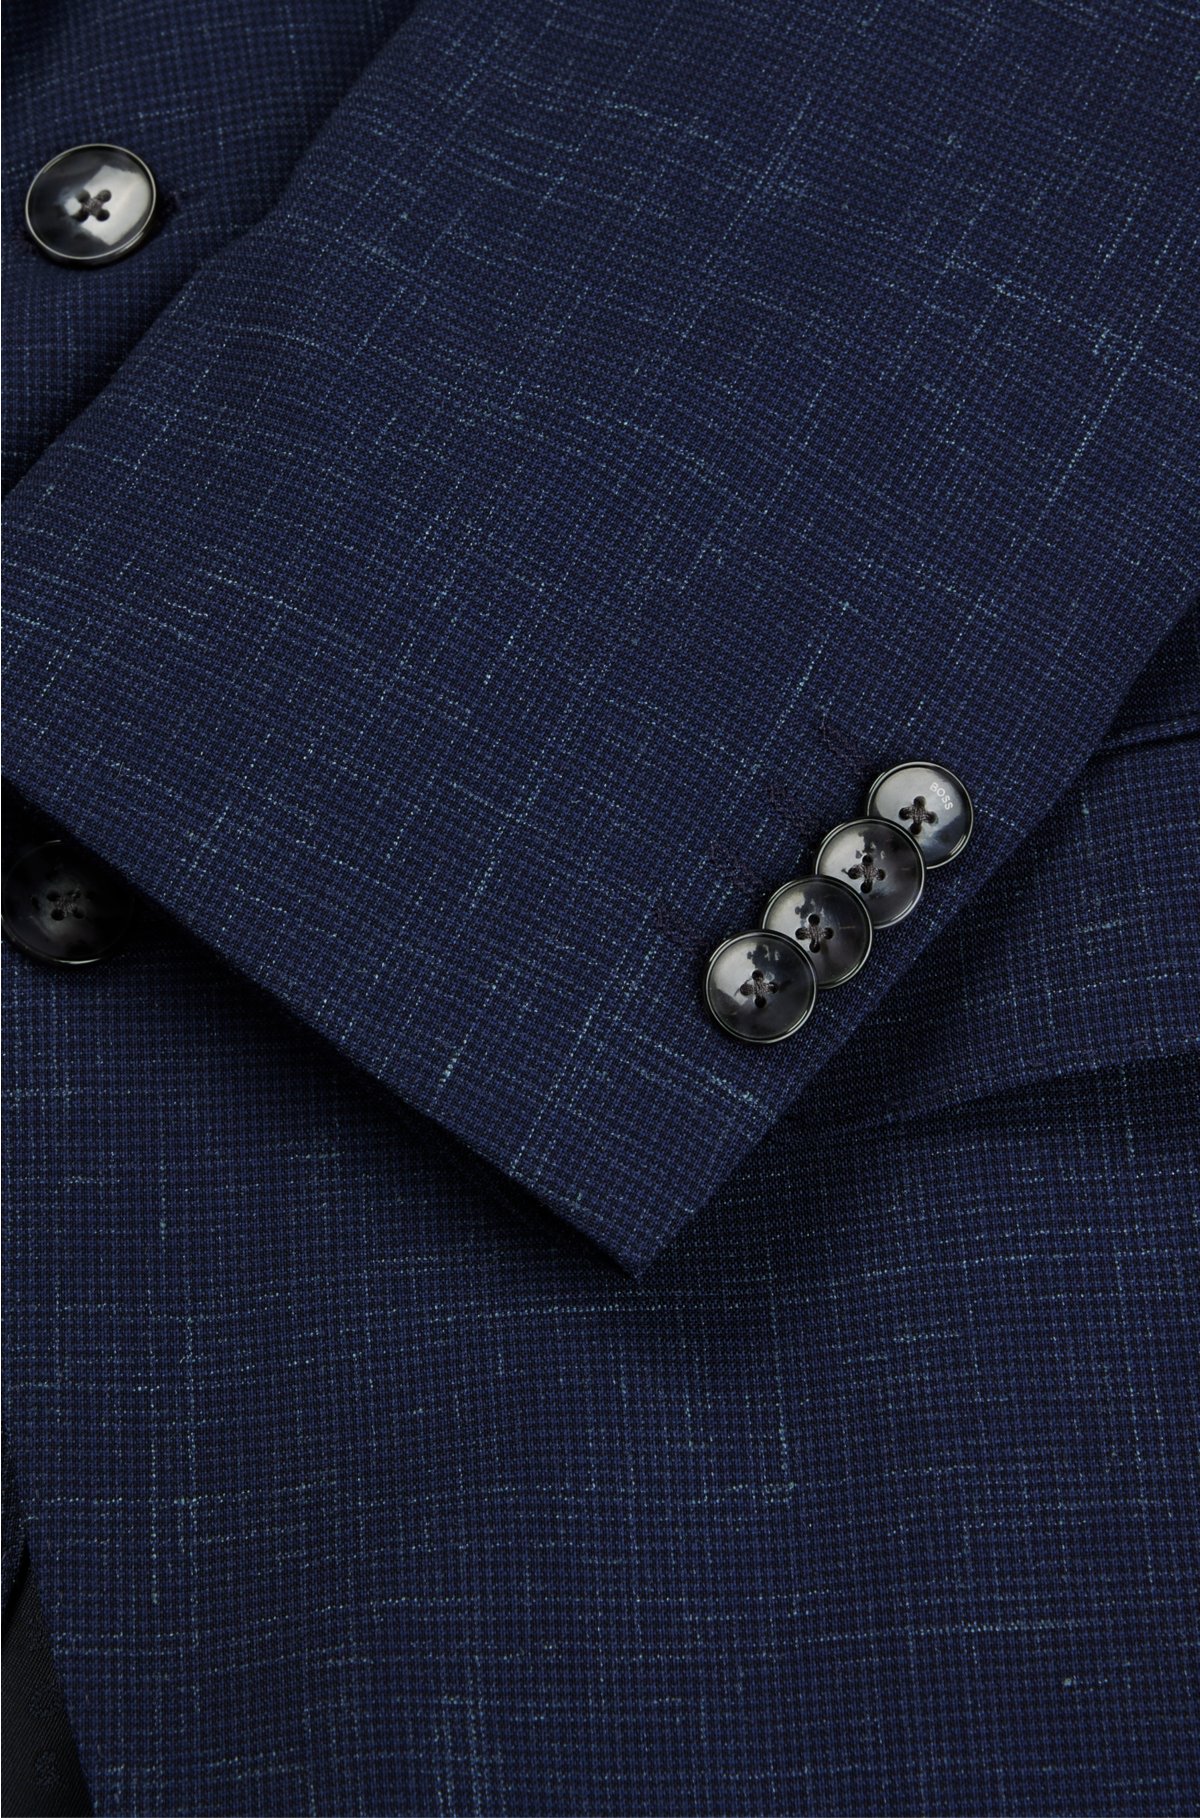 HUGO - Extra-slim-fit suit in linen-blend chambray